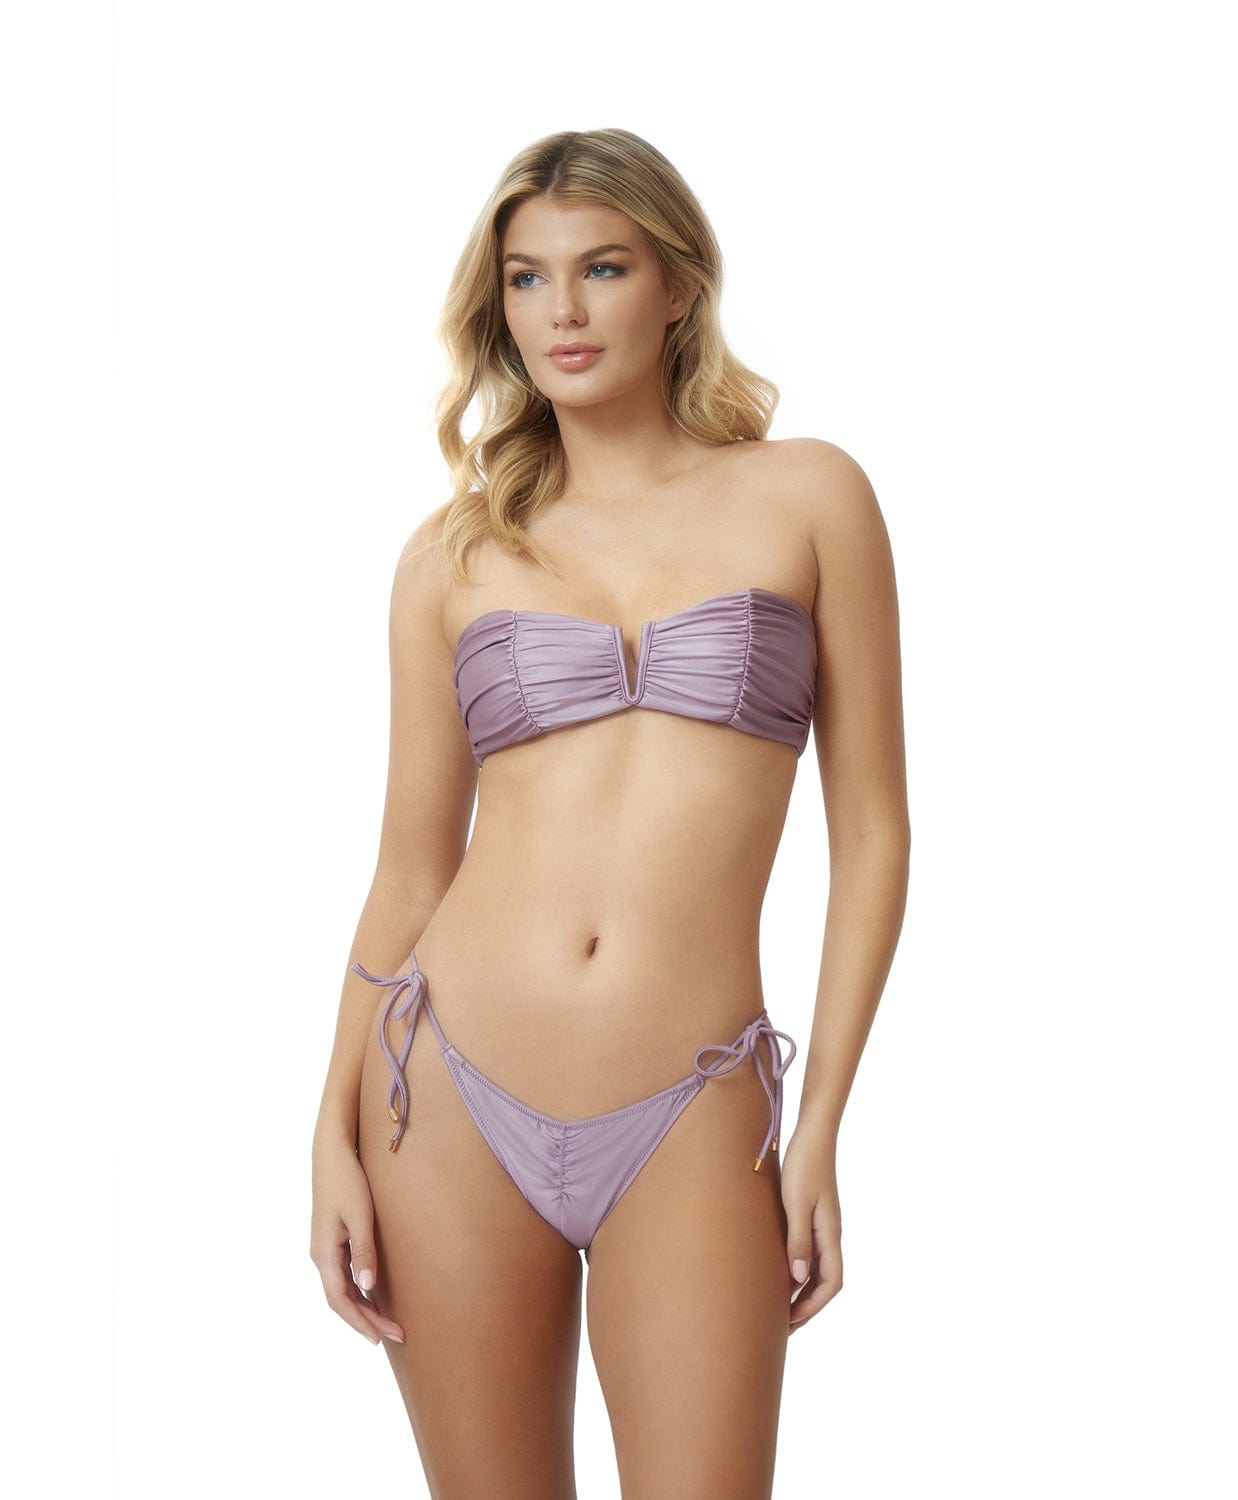 Women's Purple Bras / Lingerie Tops gifts - up to −80%